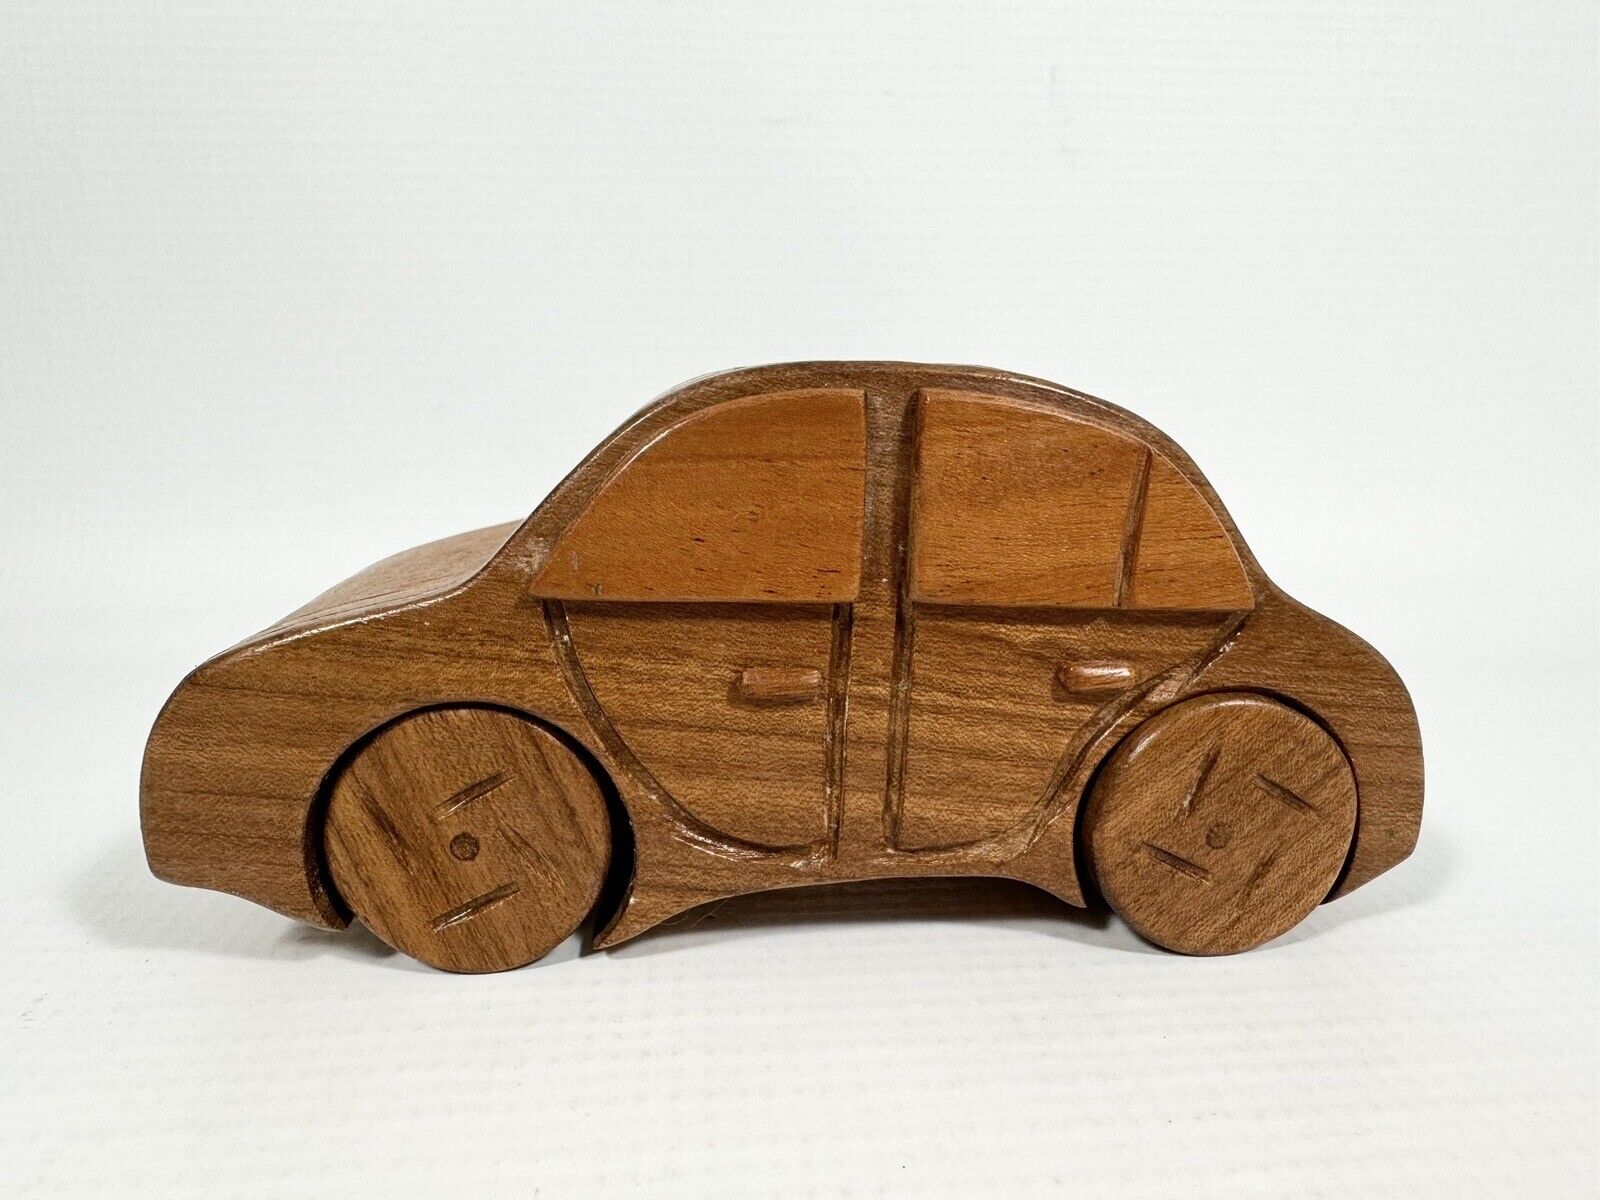 Vintage Handcrafted Wood Car Stash Box Puzzle - Wooden Automobile Puzzle Toy